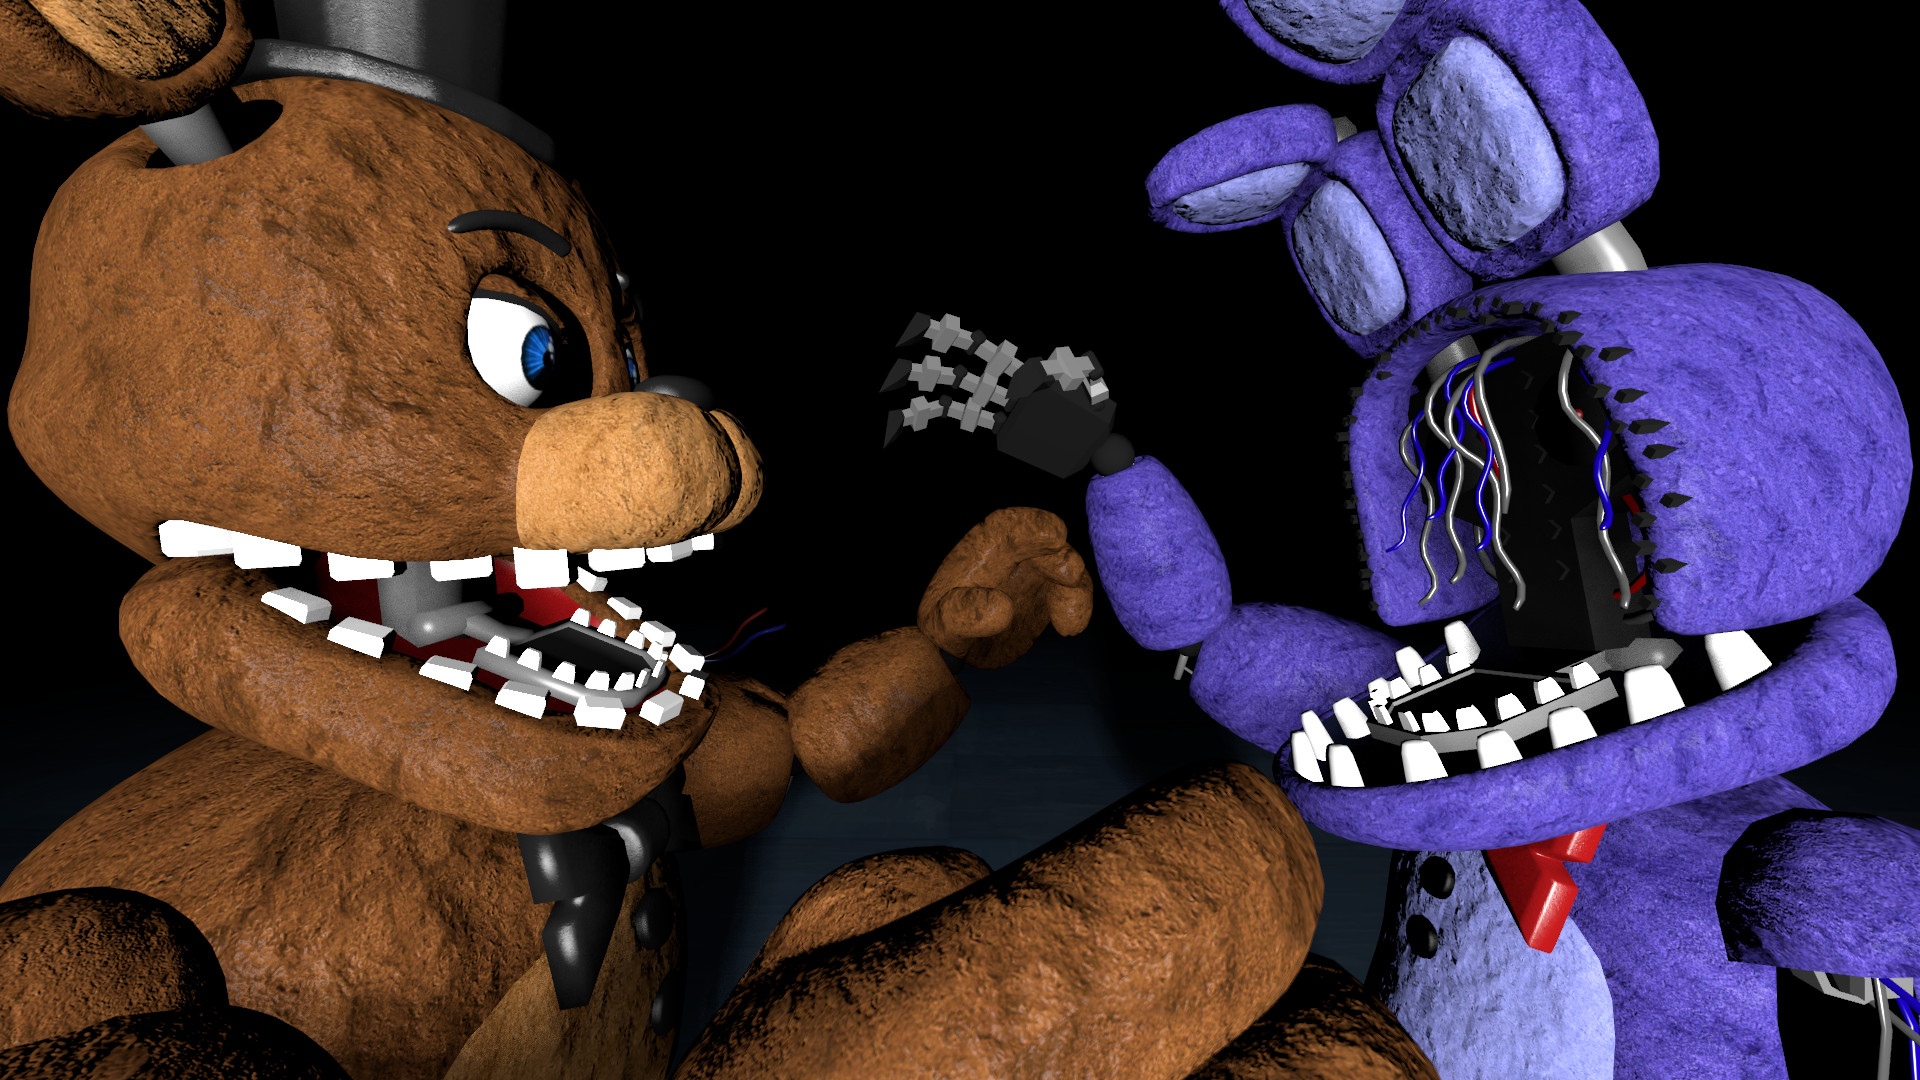 Withered freddy Fanart by marianoa2007 on DeviantArt